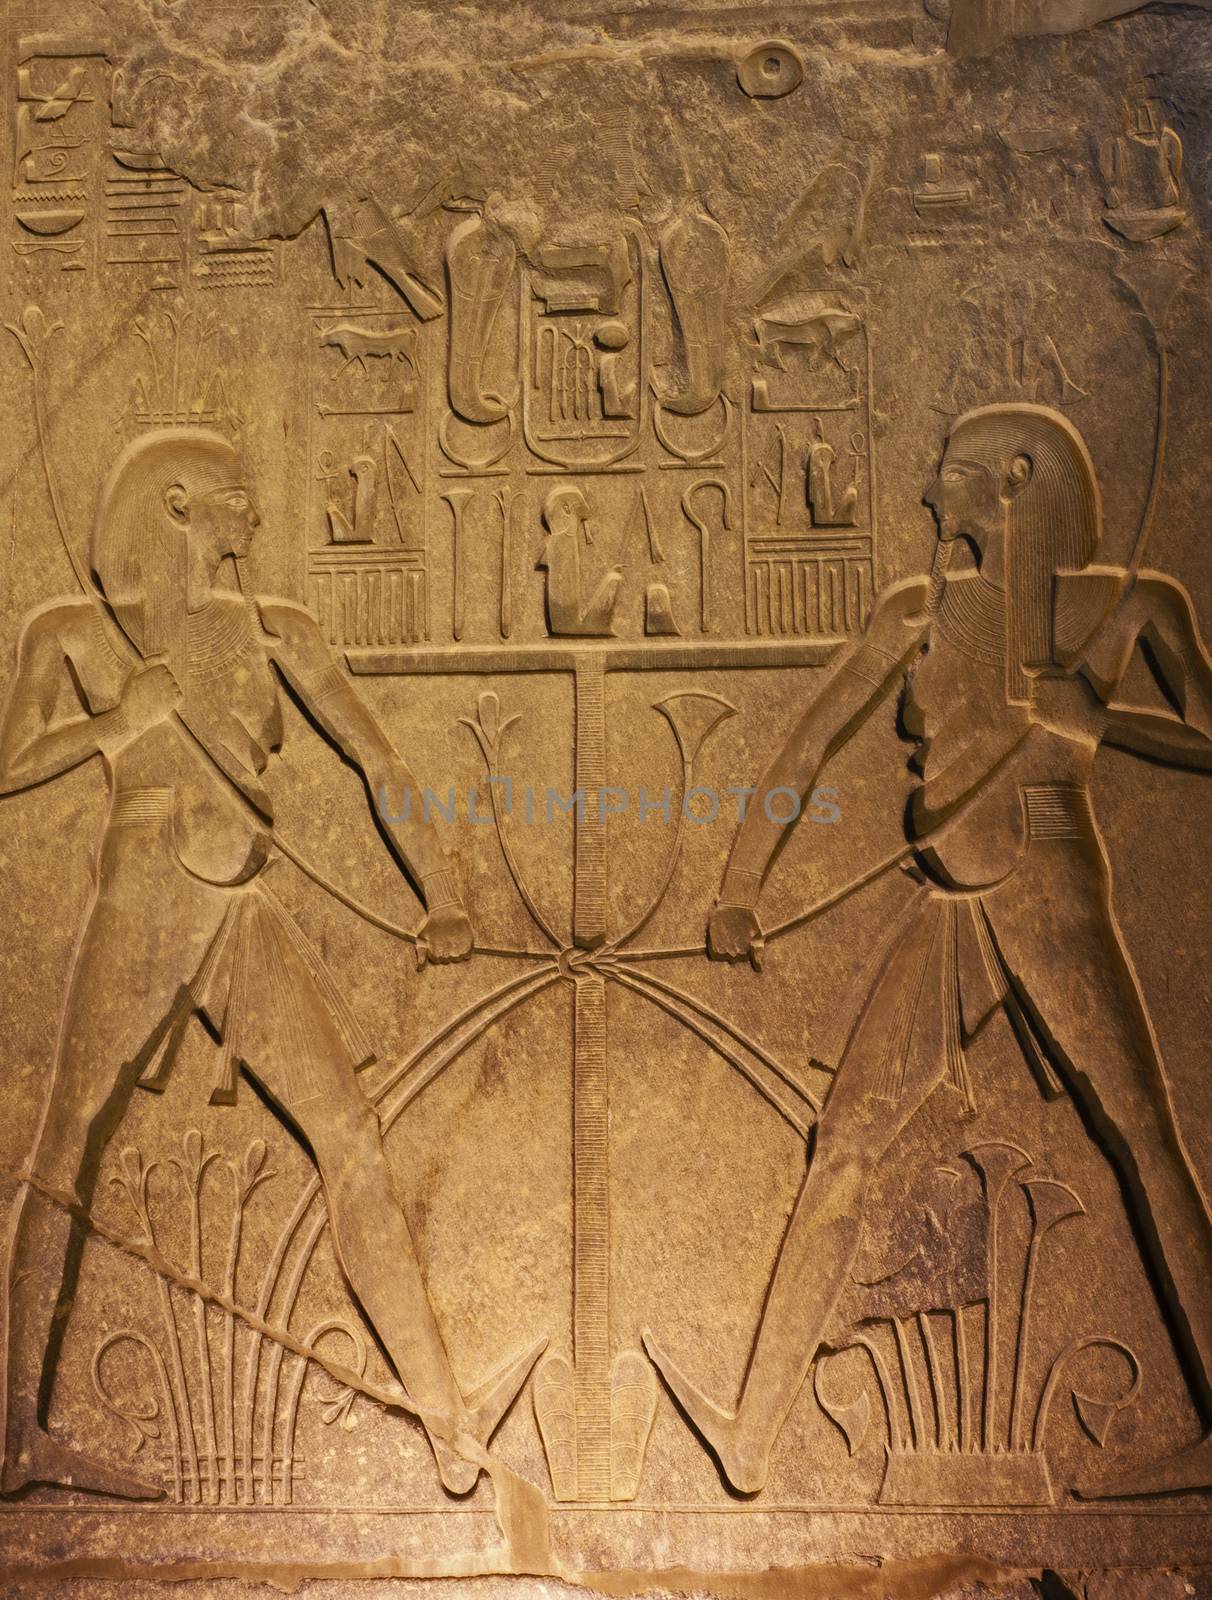 Large hieroglyphic carvings on wall at ancient egyptian Luxor Temple lit up during night background wallpaper